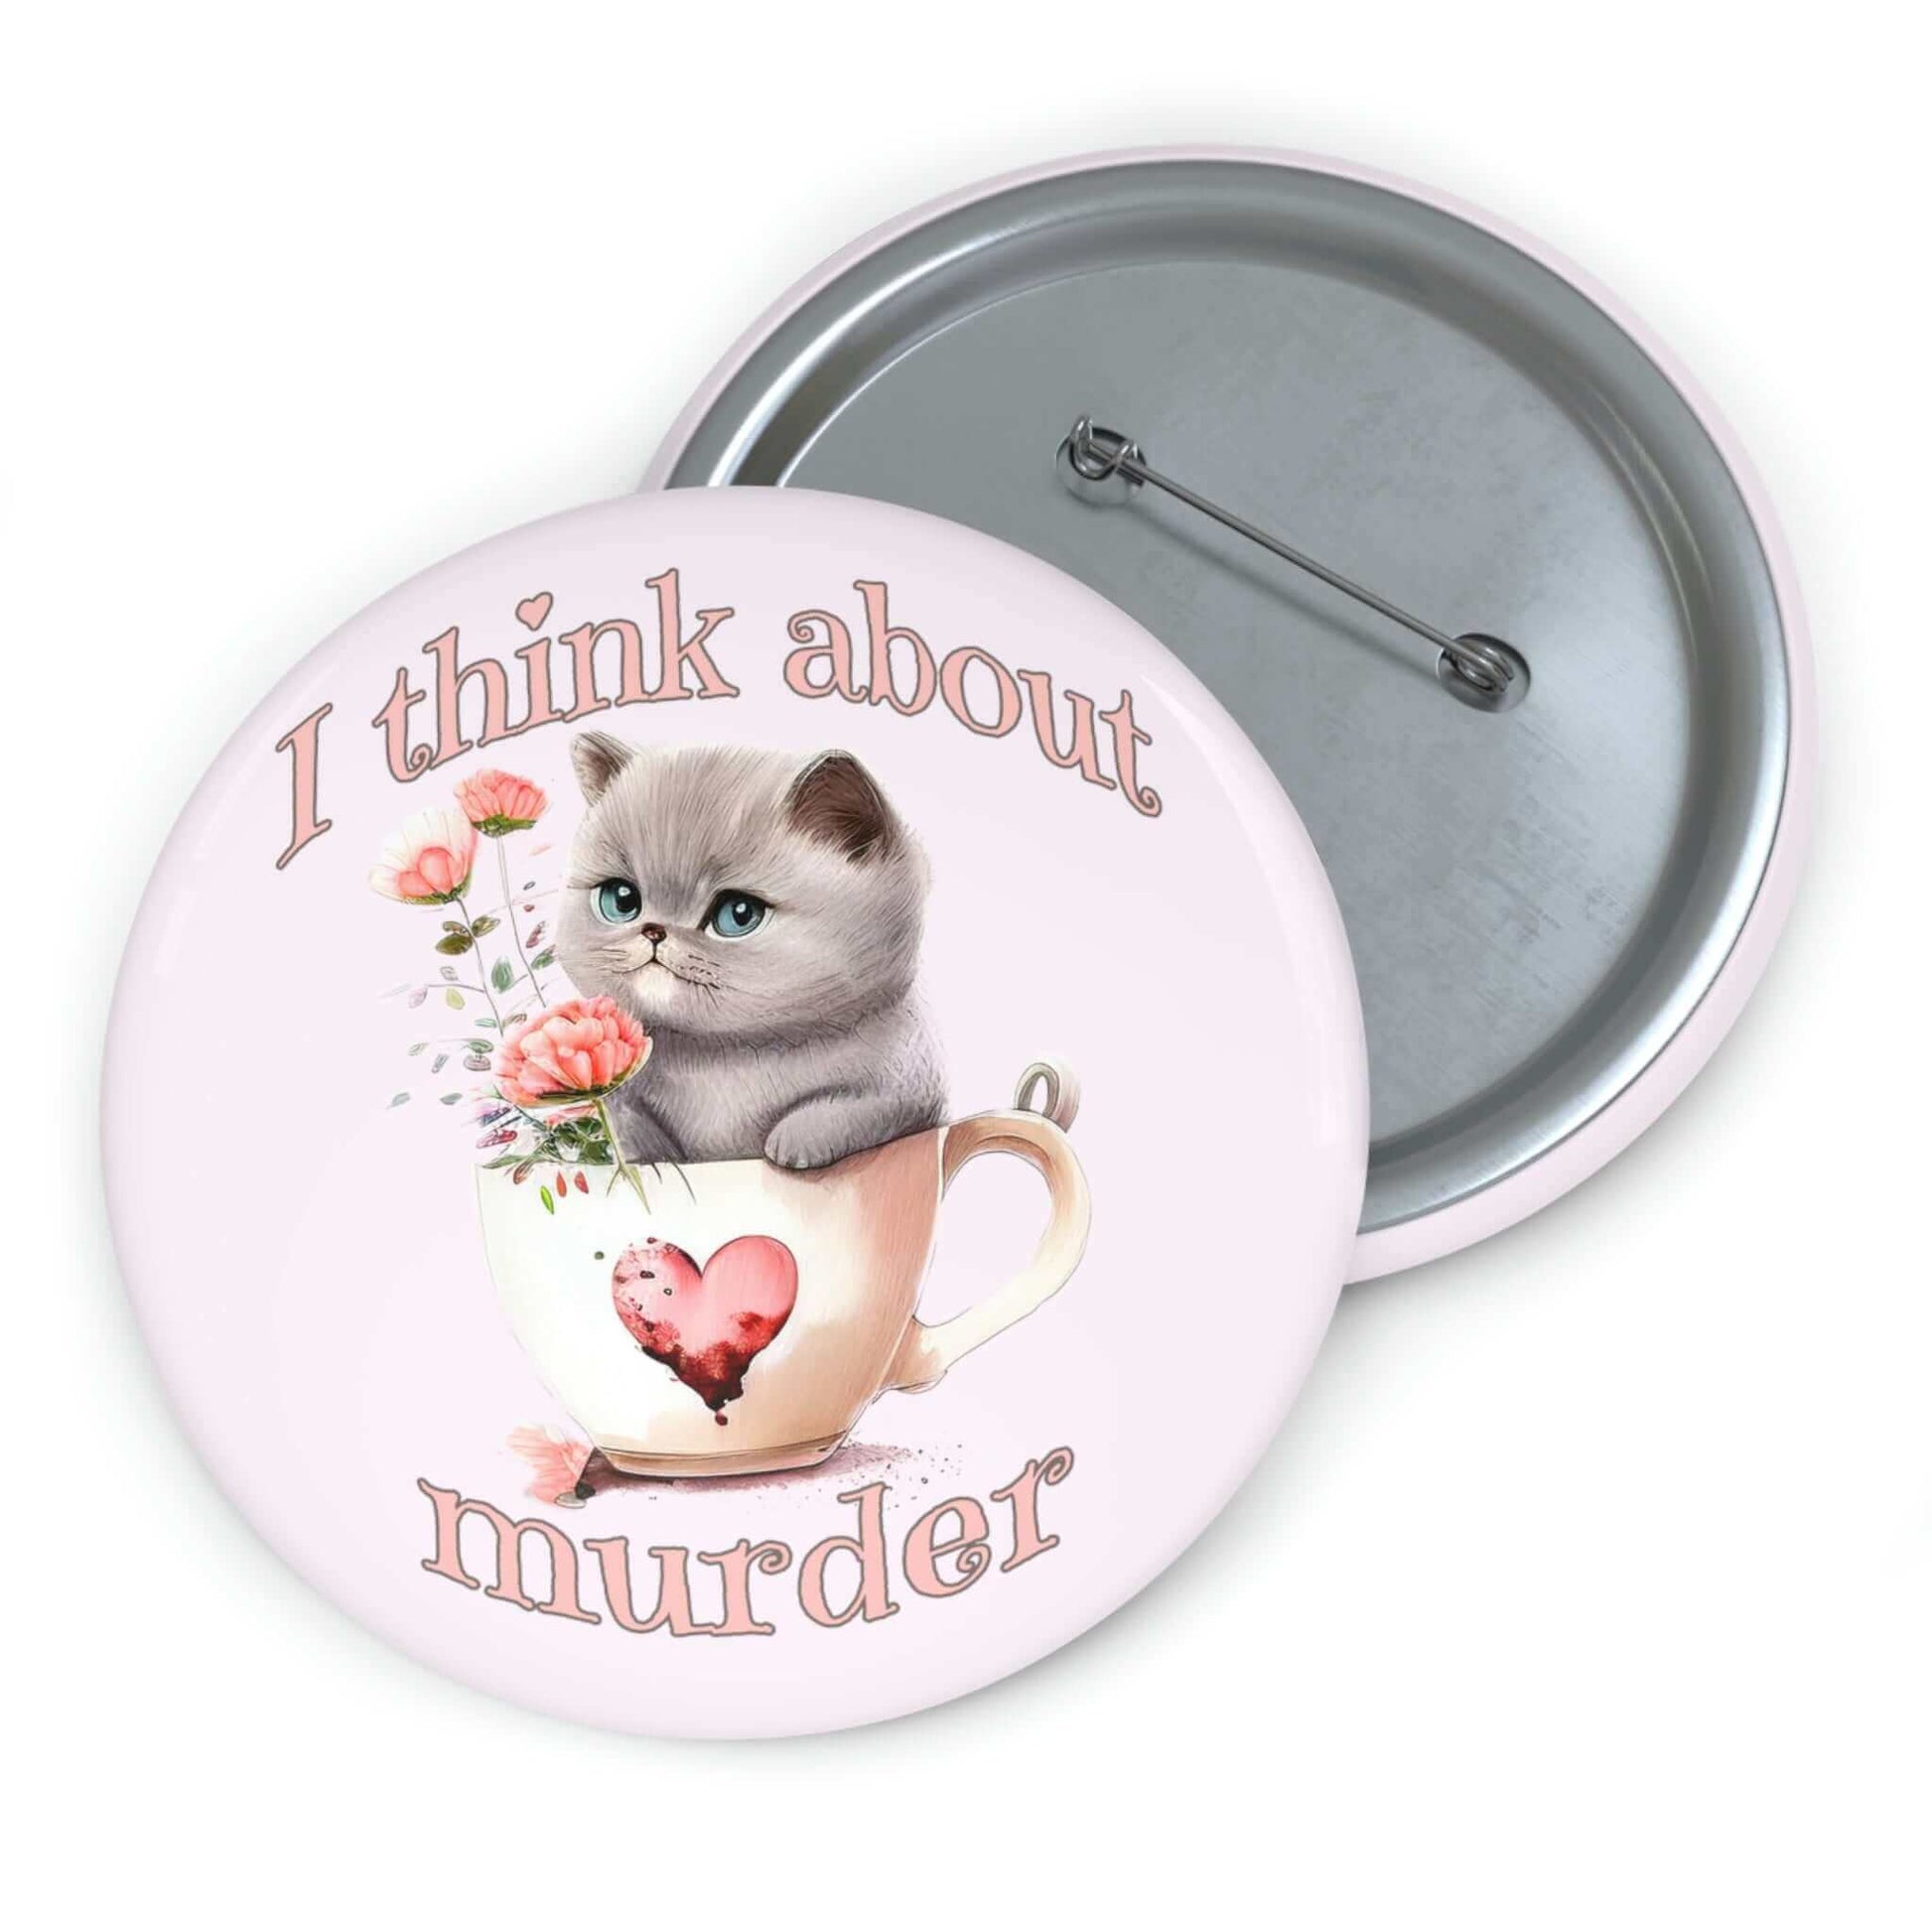 Sarcastic pin-back button that says I think about murder with image of cute fluffy kitten sitting in a teacup.